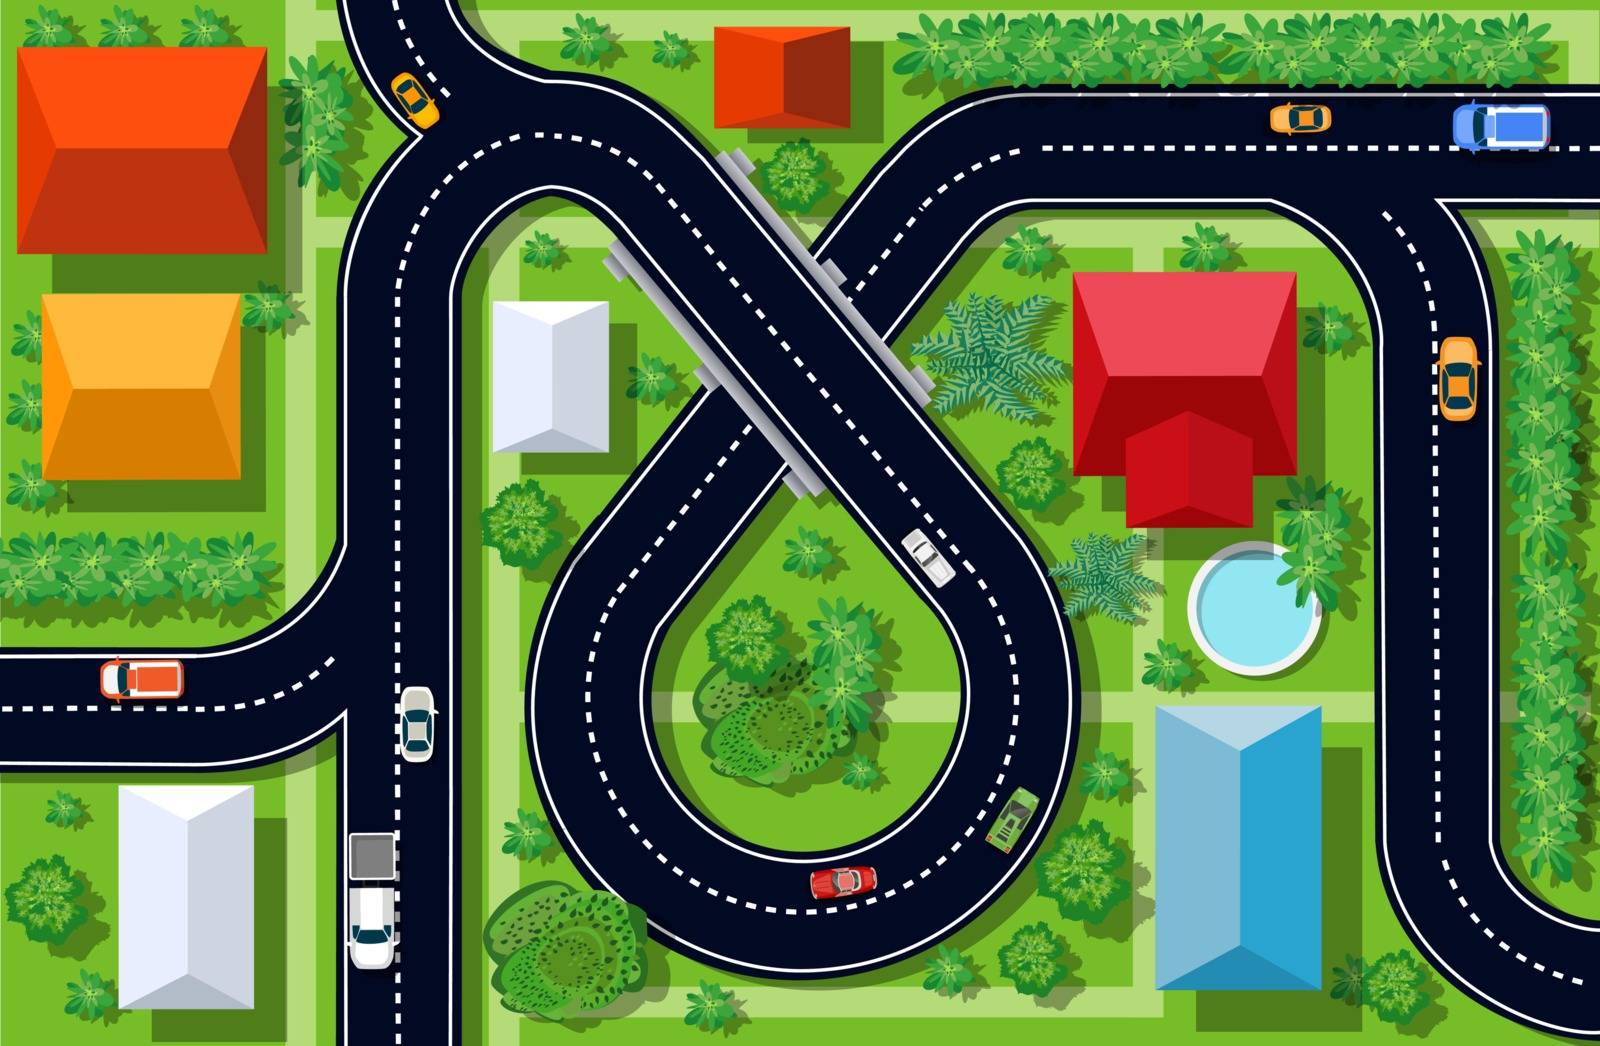 Top view of a highway junction and a traffic intersection in the city with houses, trees and streets